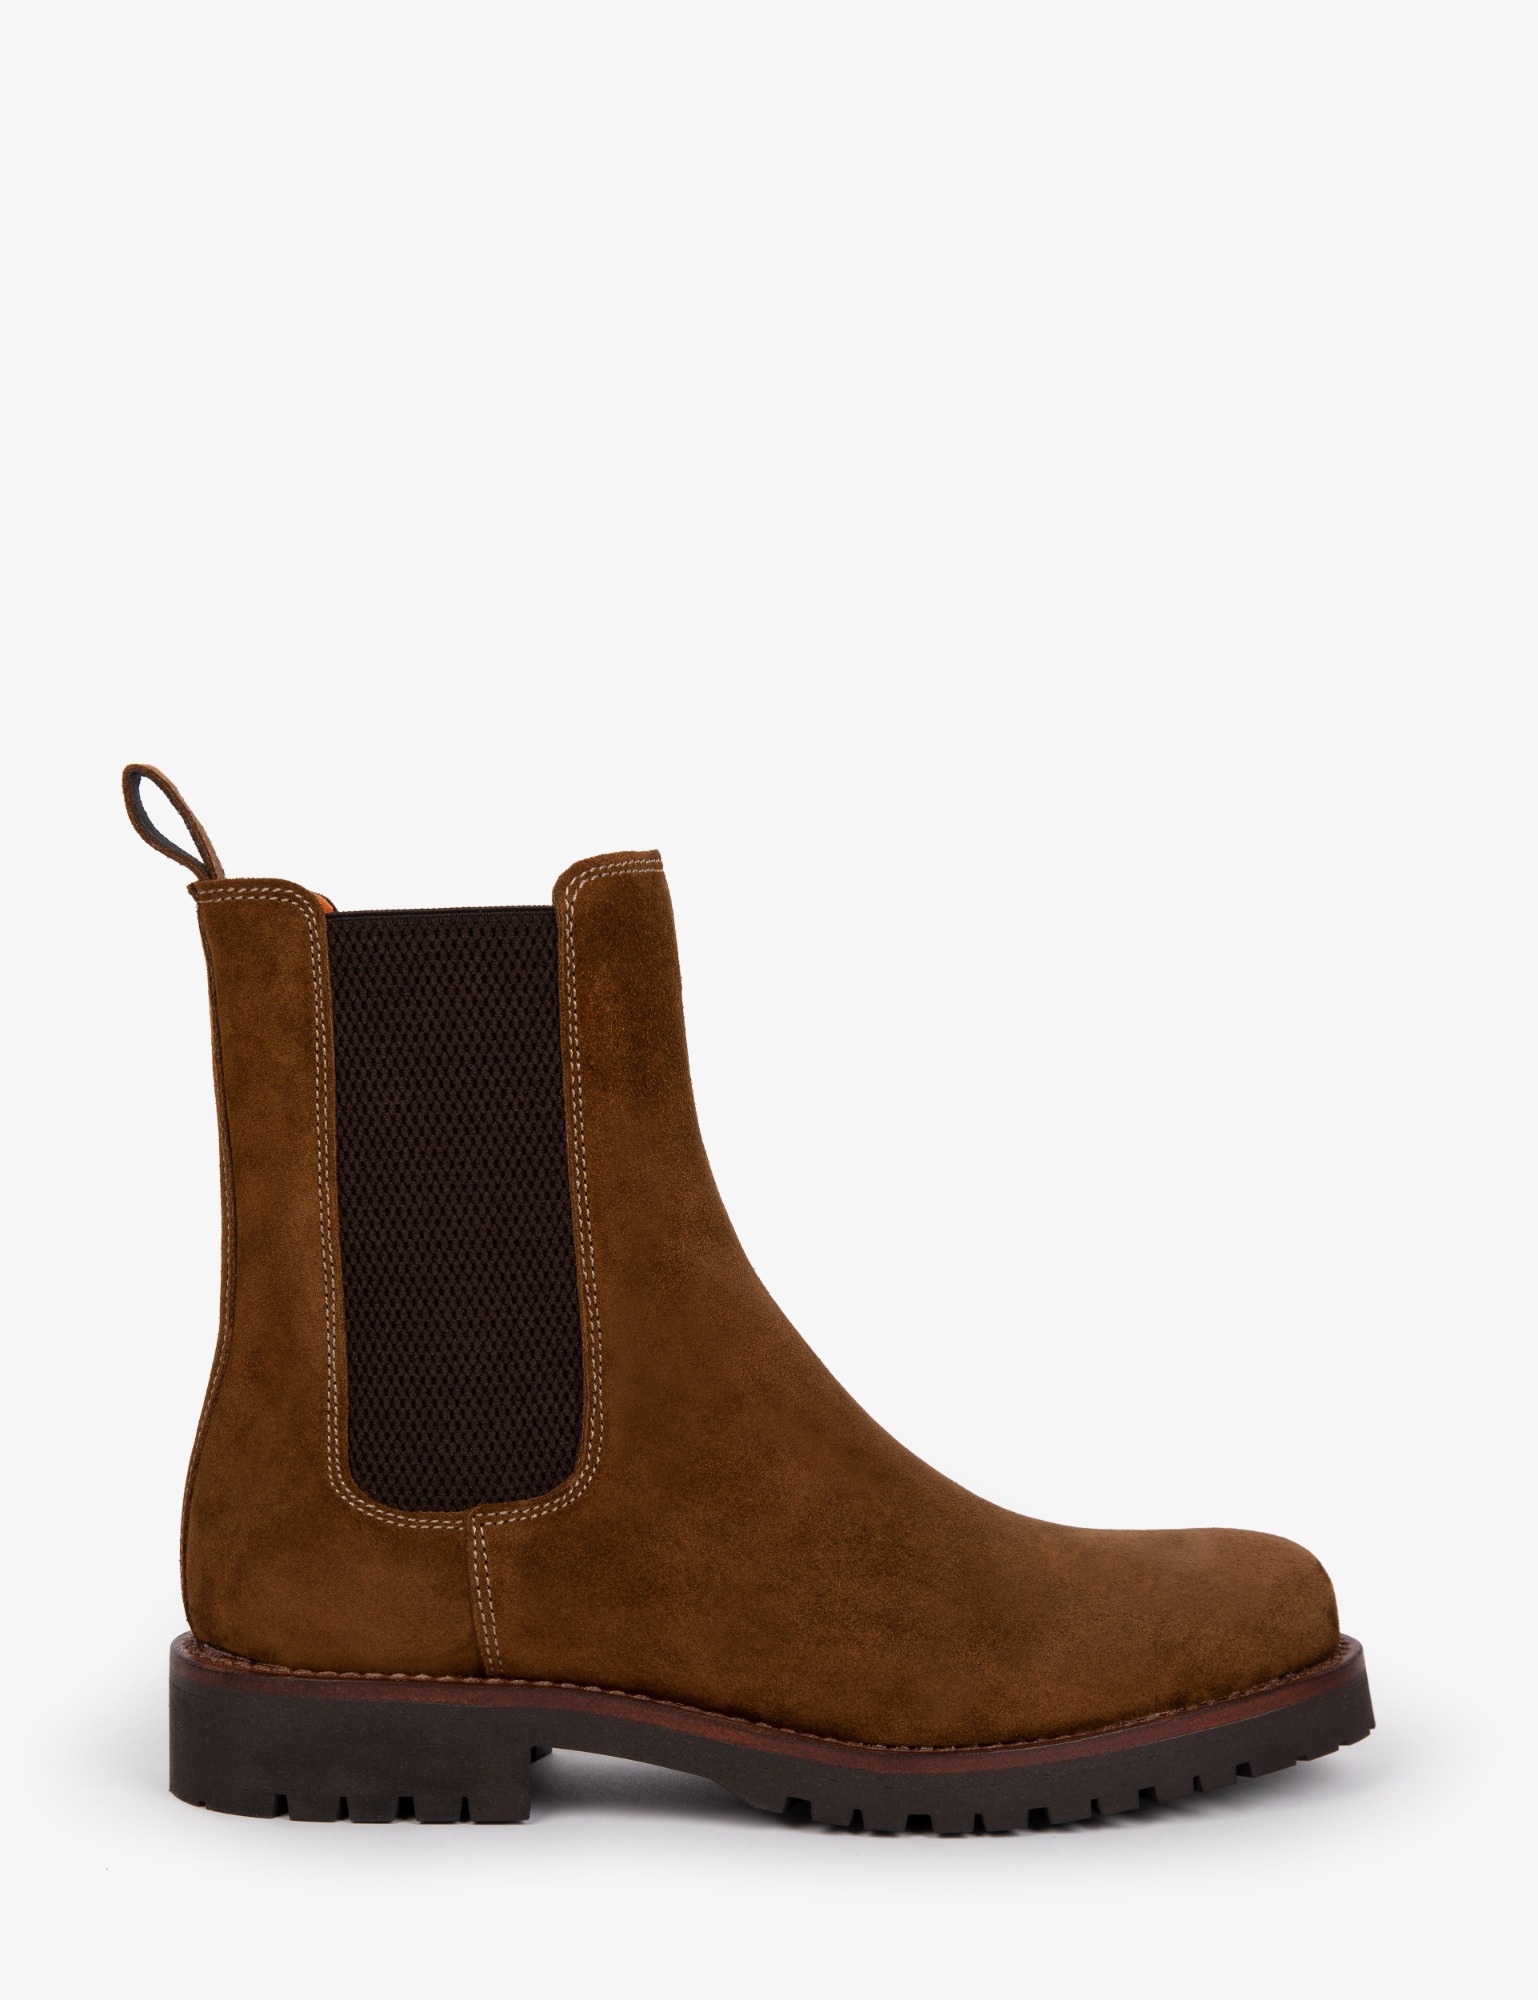 Doma Suede Boot